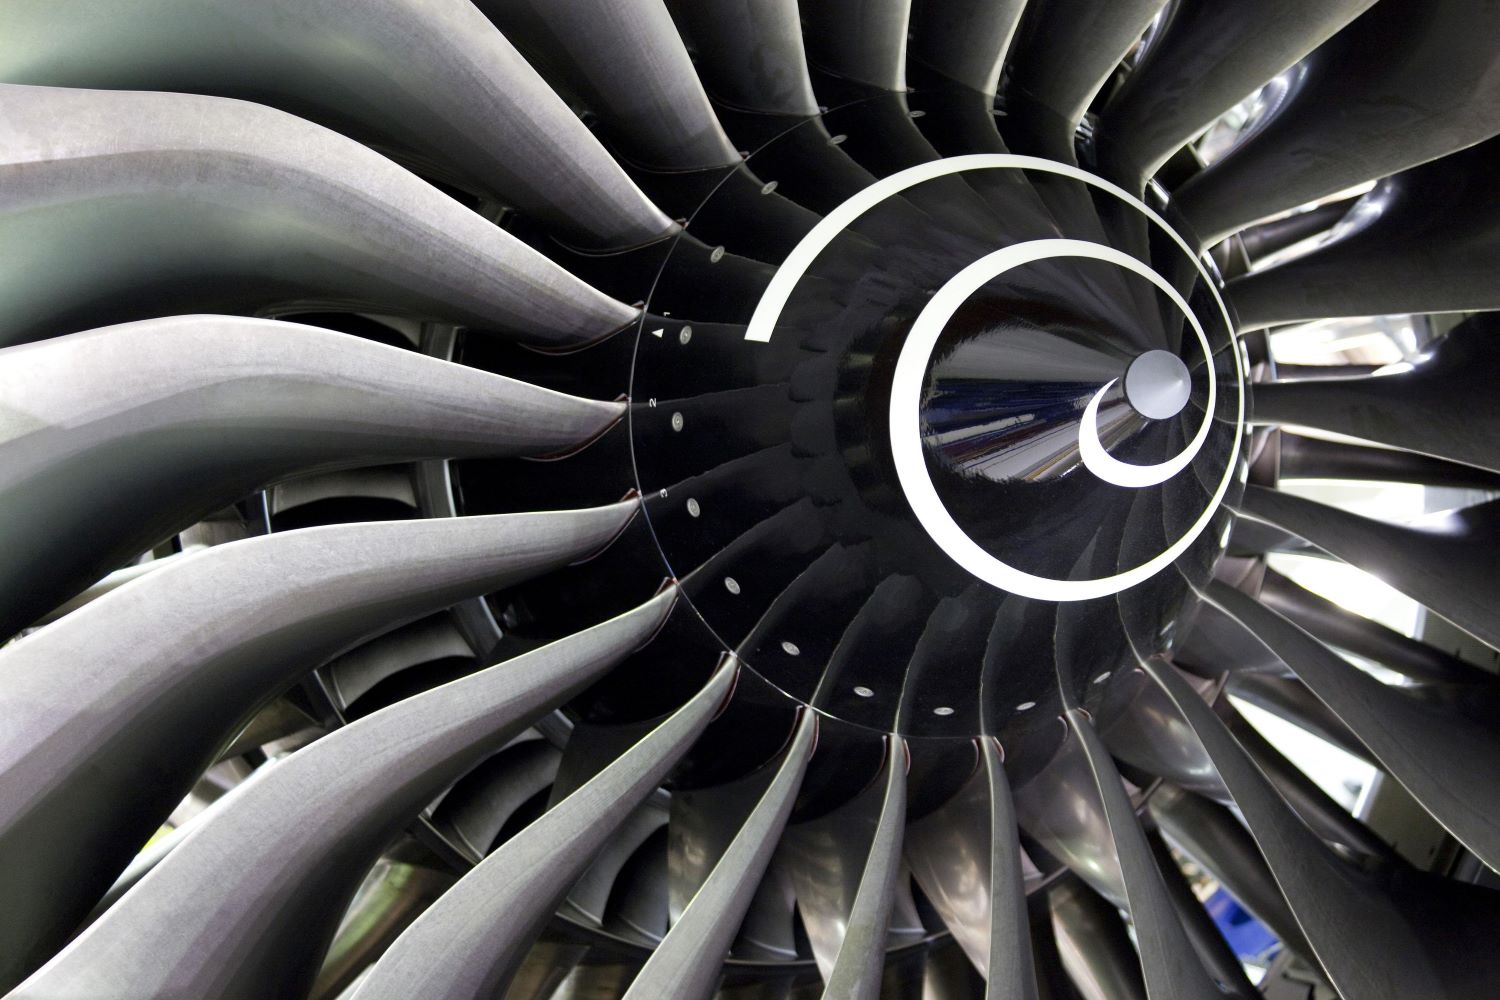 Rolls-Royce invests in large engine assembly, test and shop visit capacity